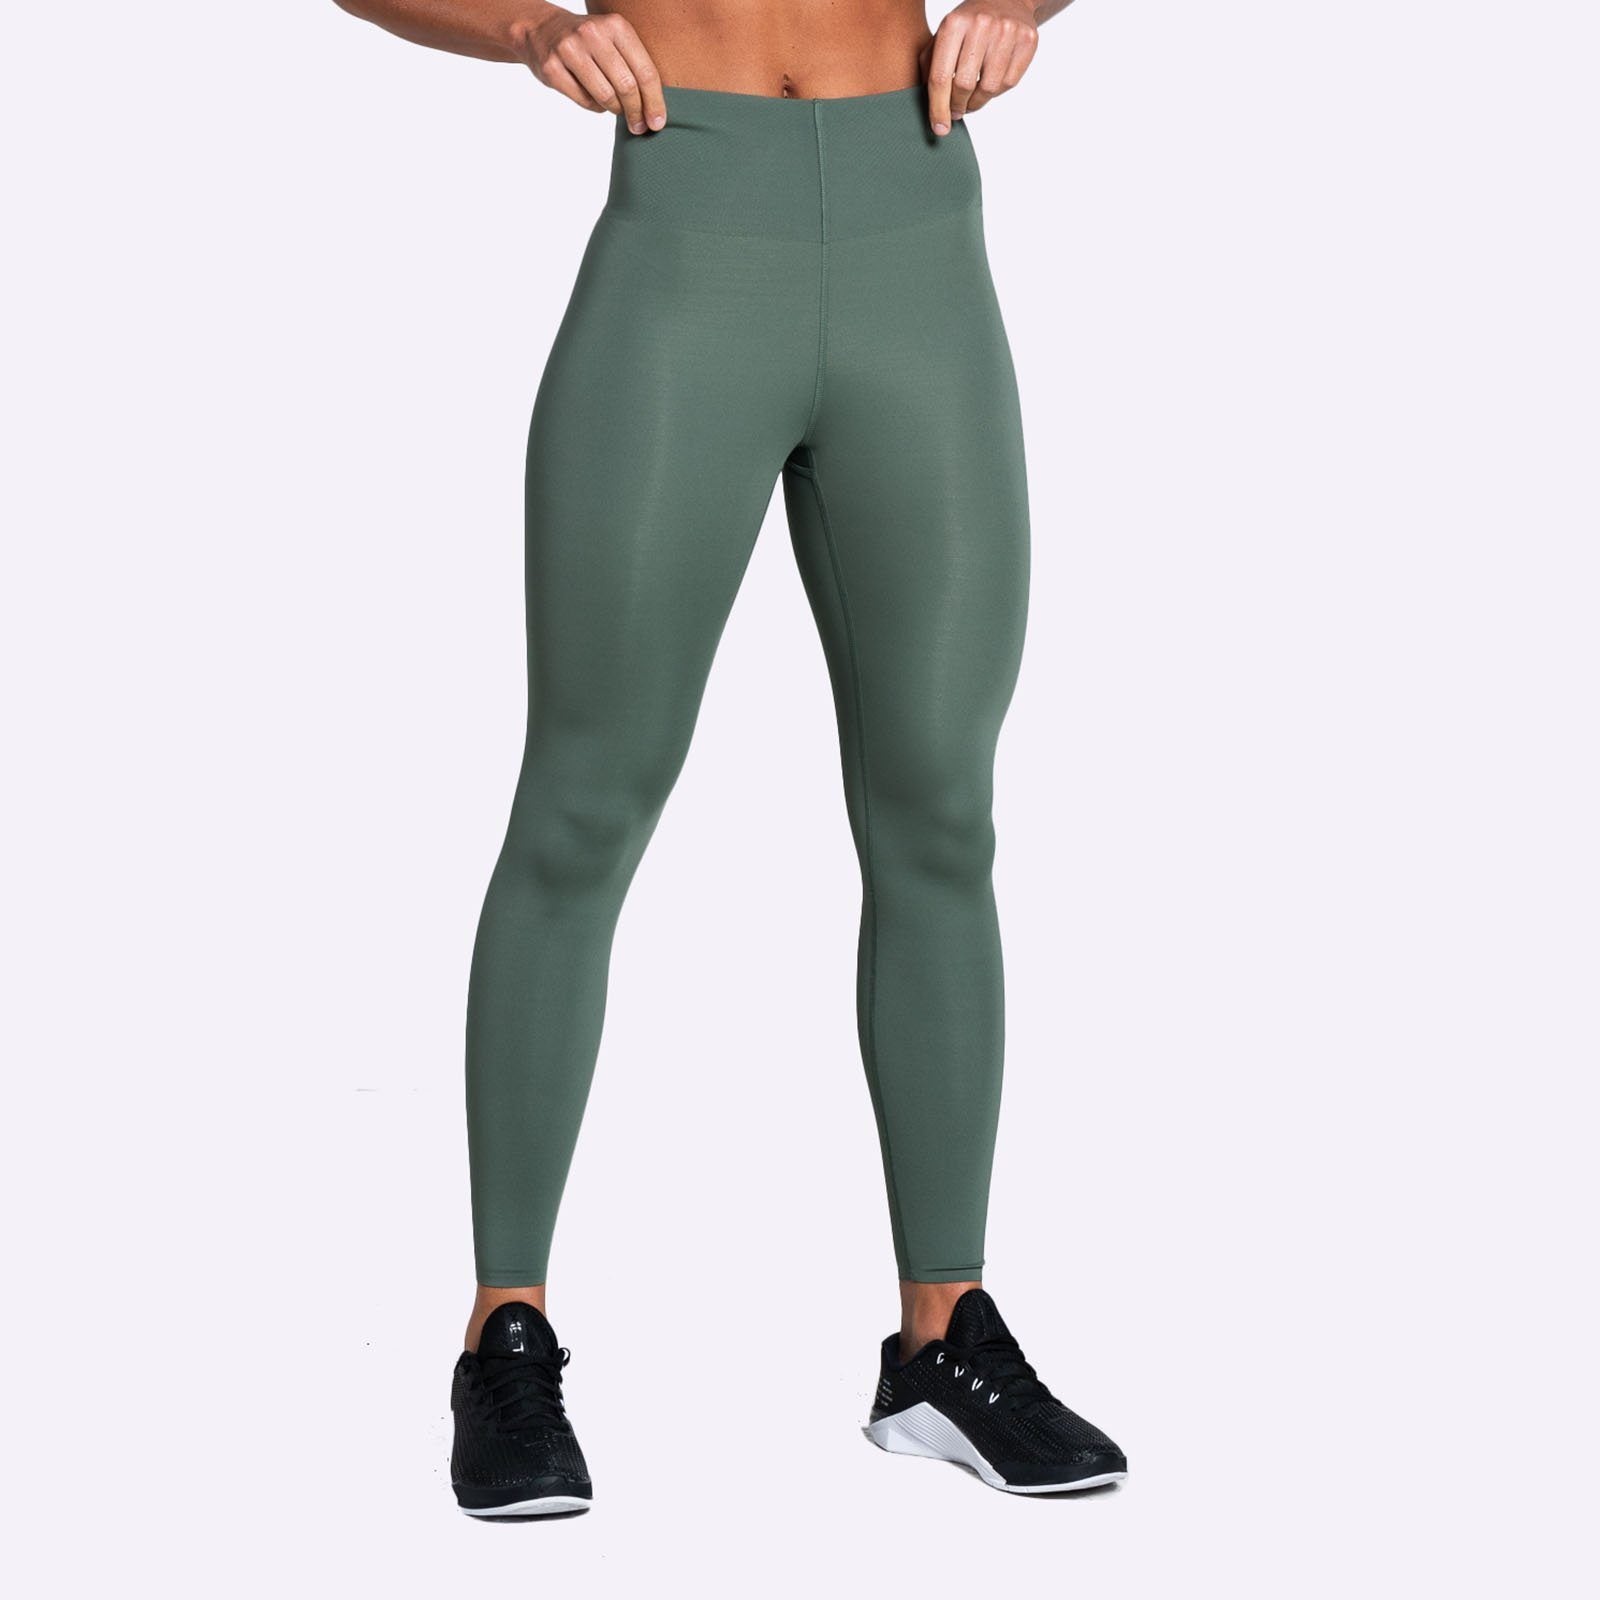 Brand new with tags - Women’s Nike sculpt hyper